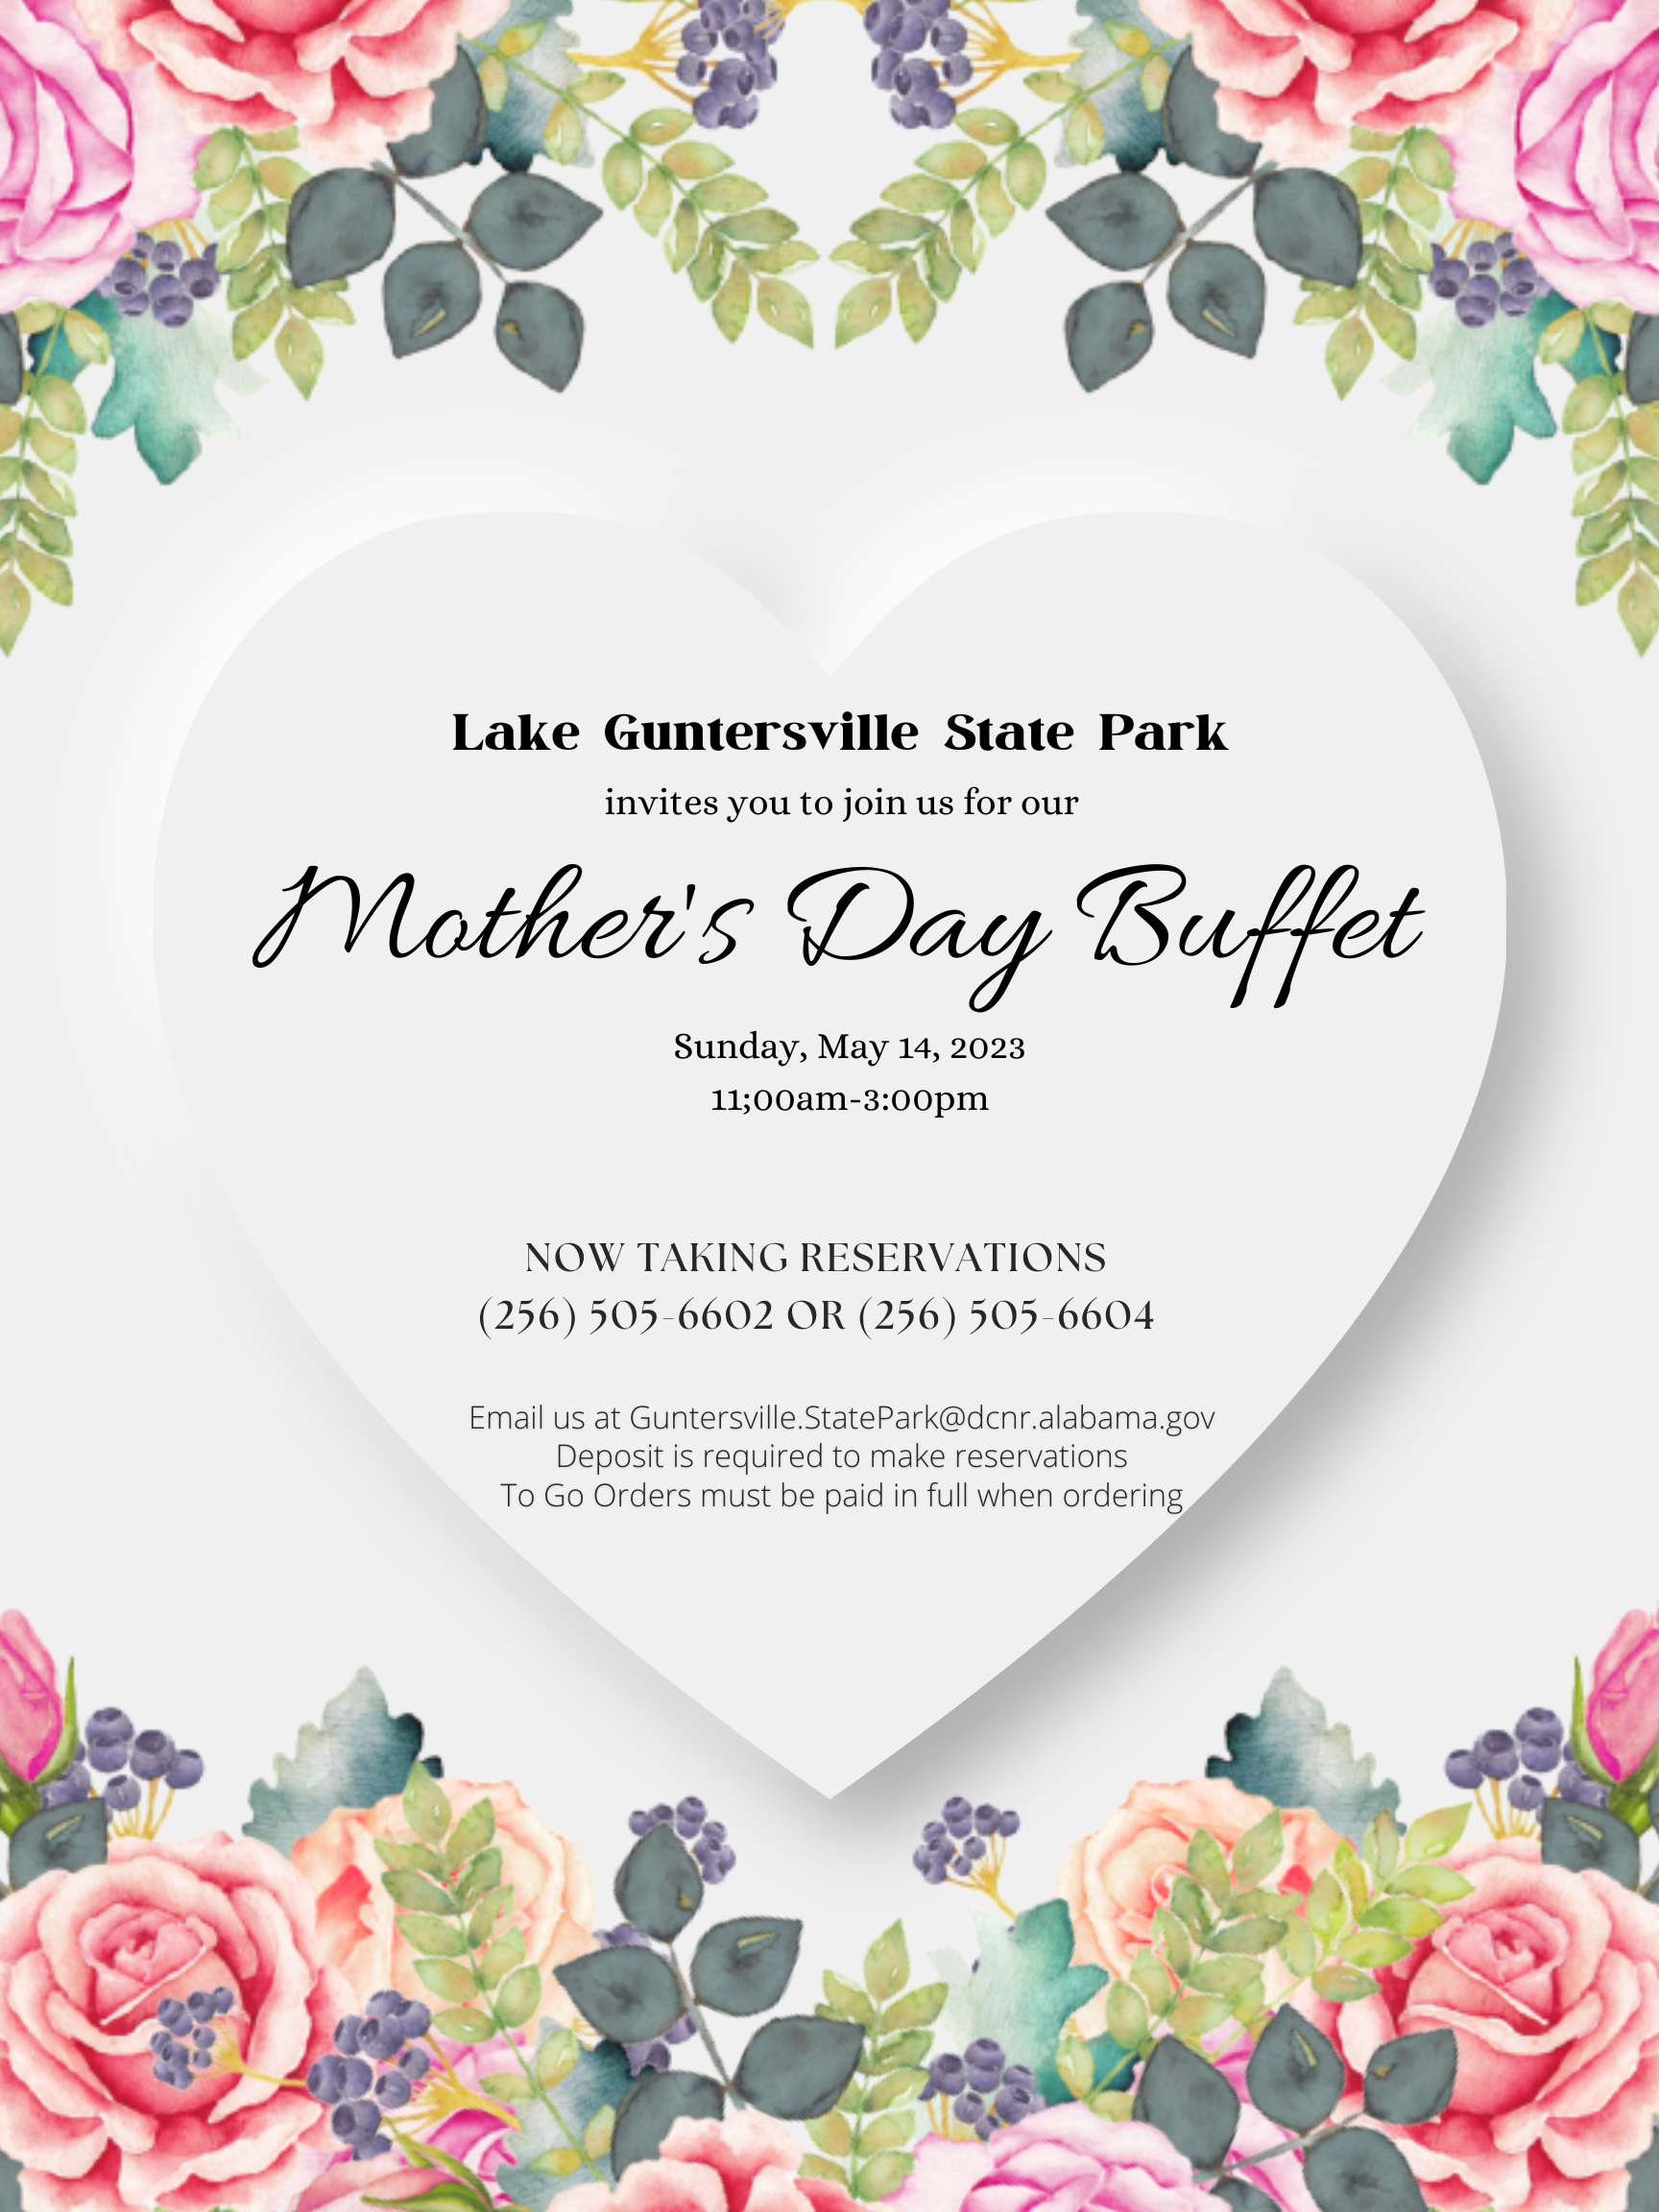 LGSP Mothers Day 2023